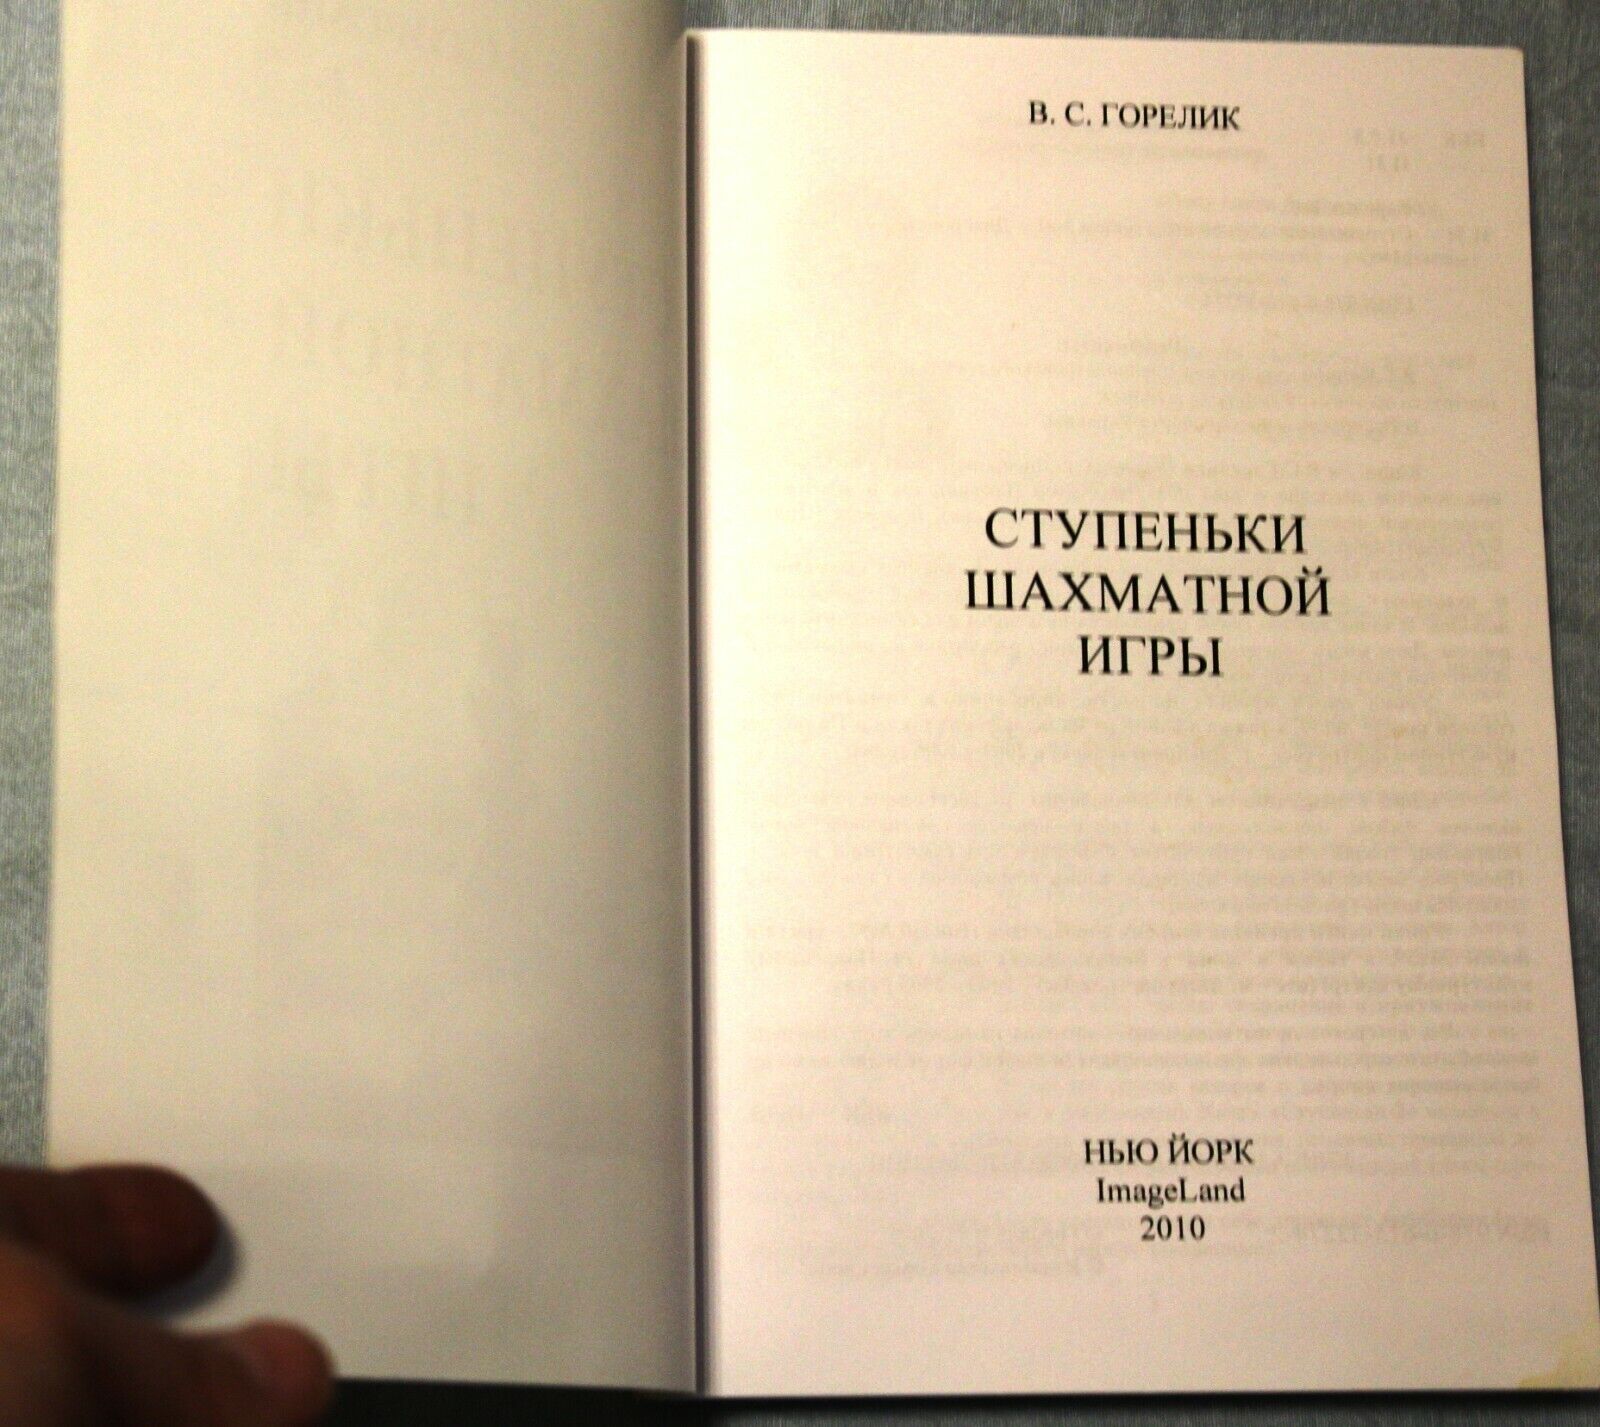 11491.Russian Chess Book. Steps of the chess game. Gorelik. New York, 2010